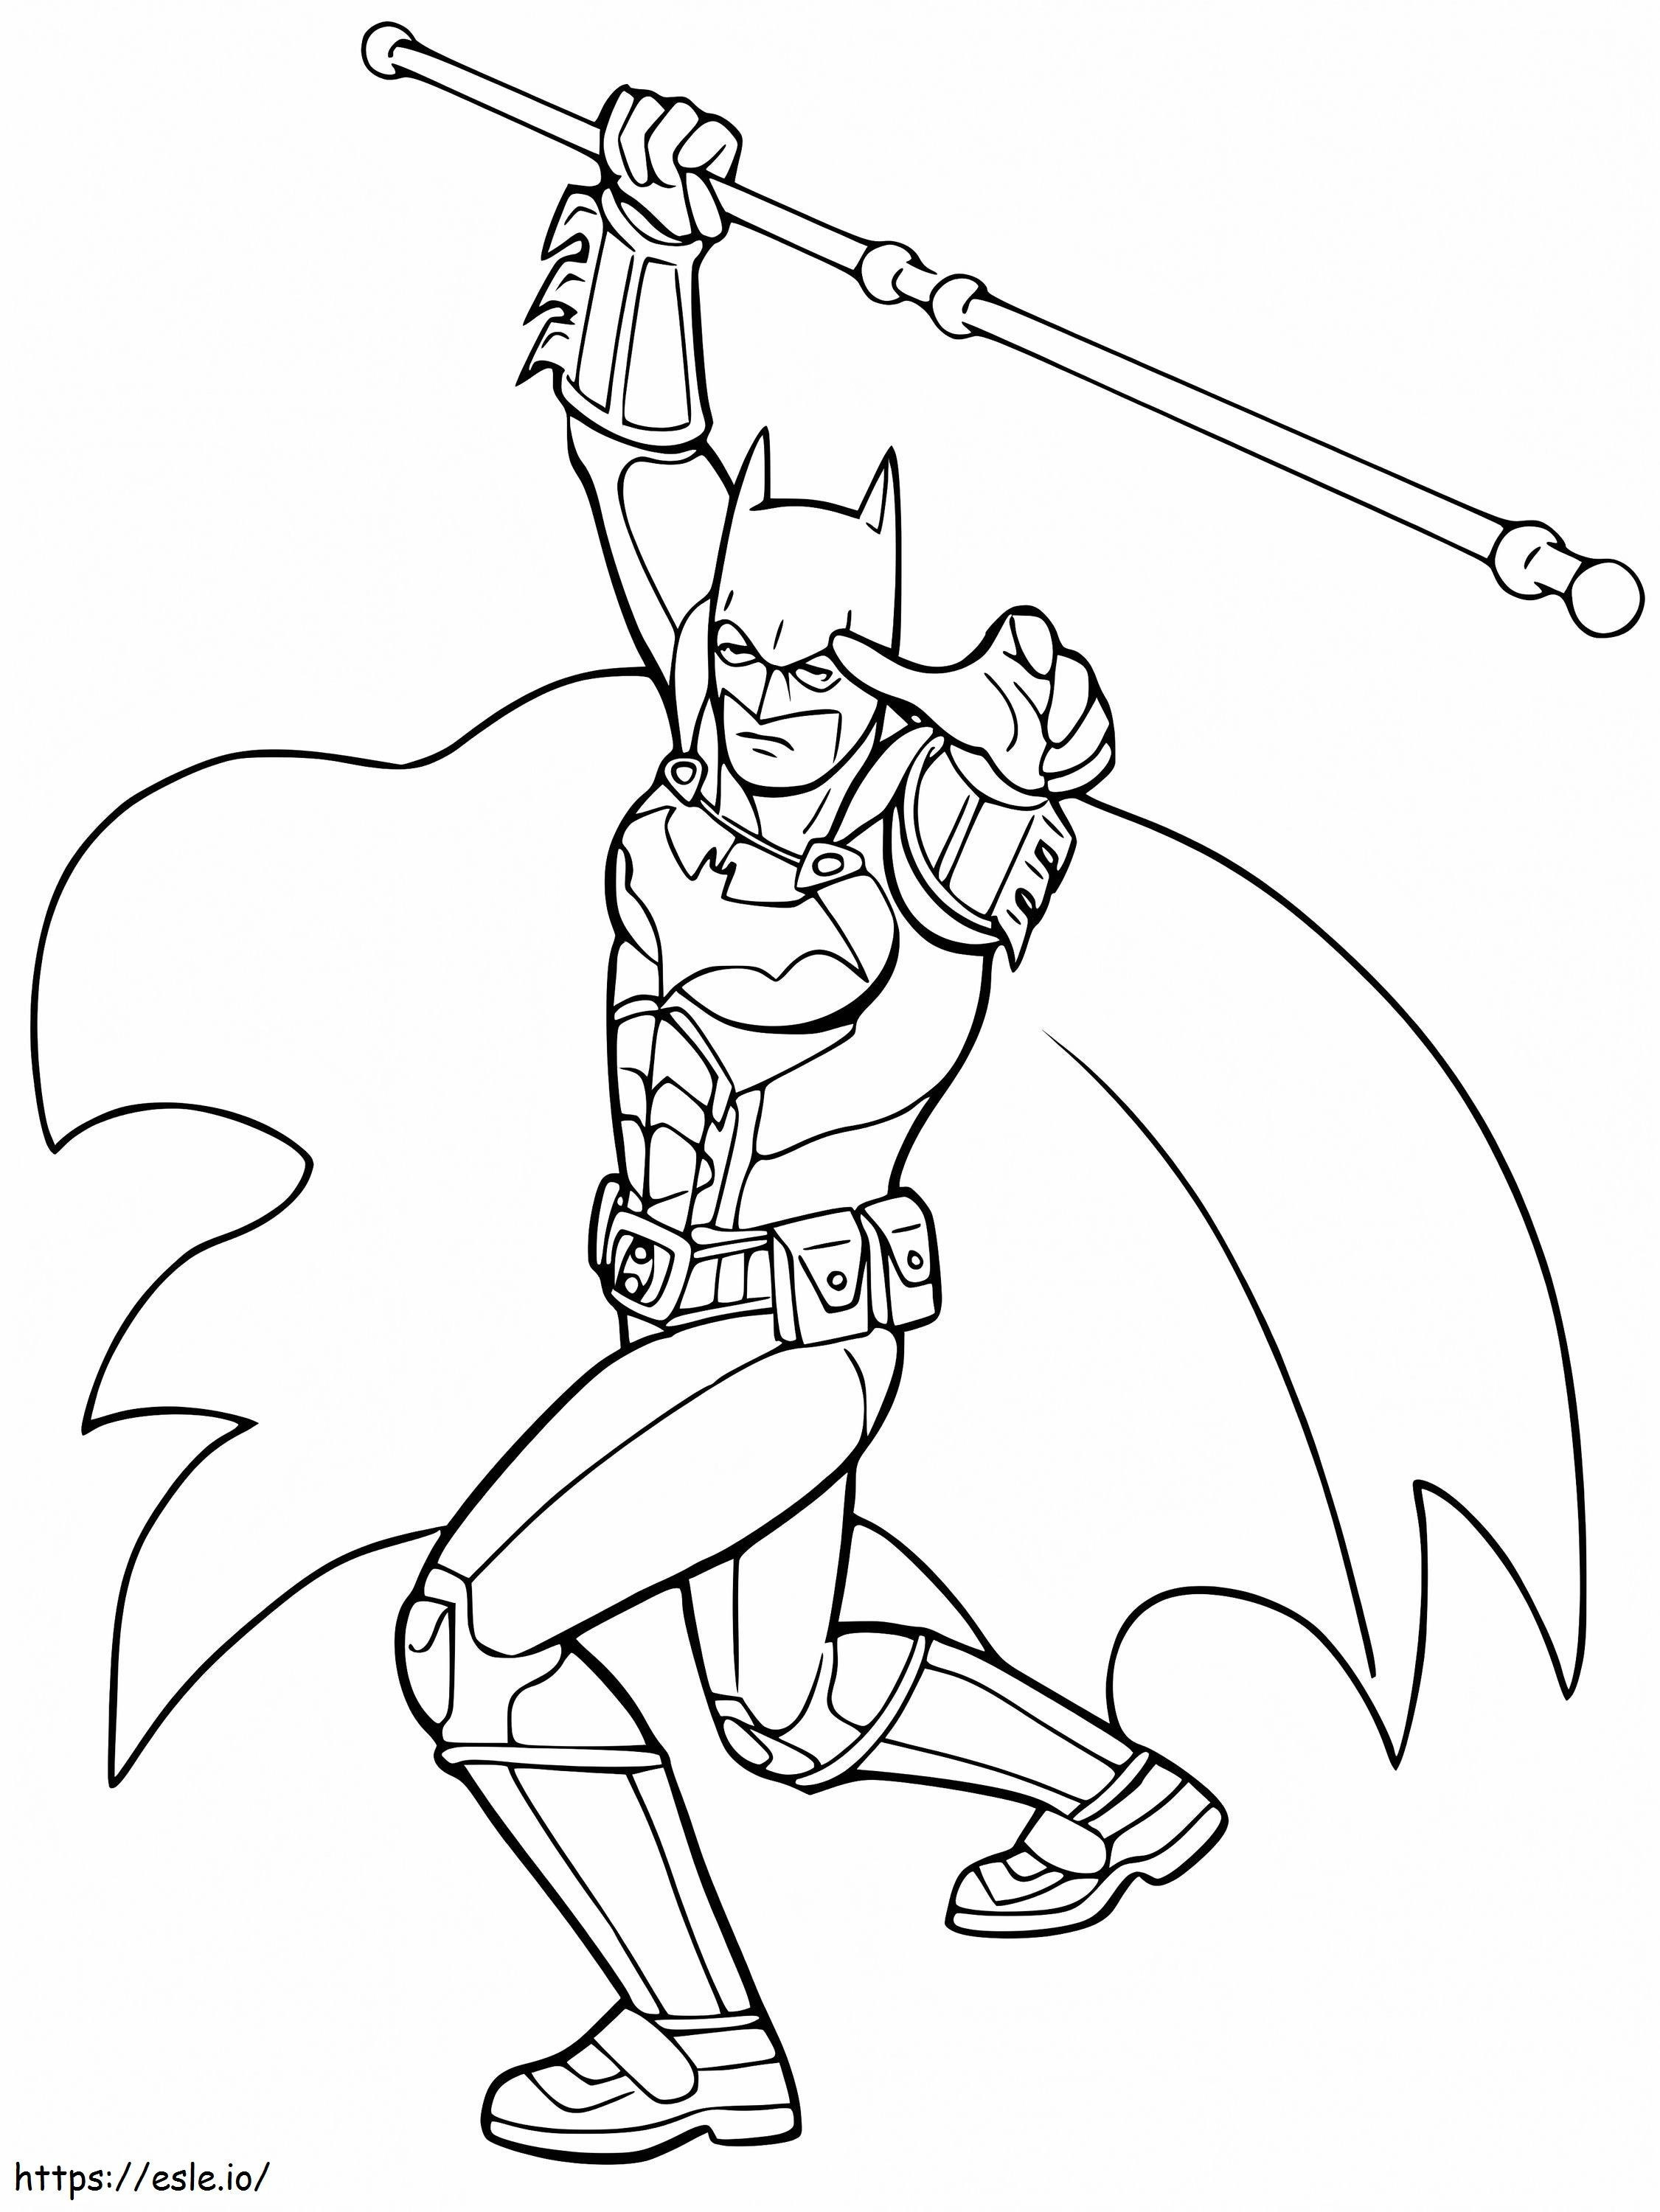 Batman With Stick coloring page